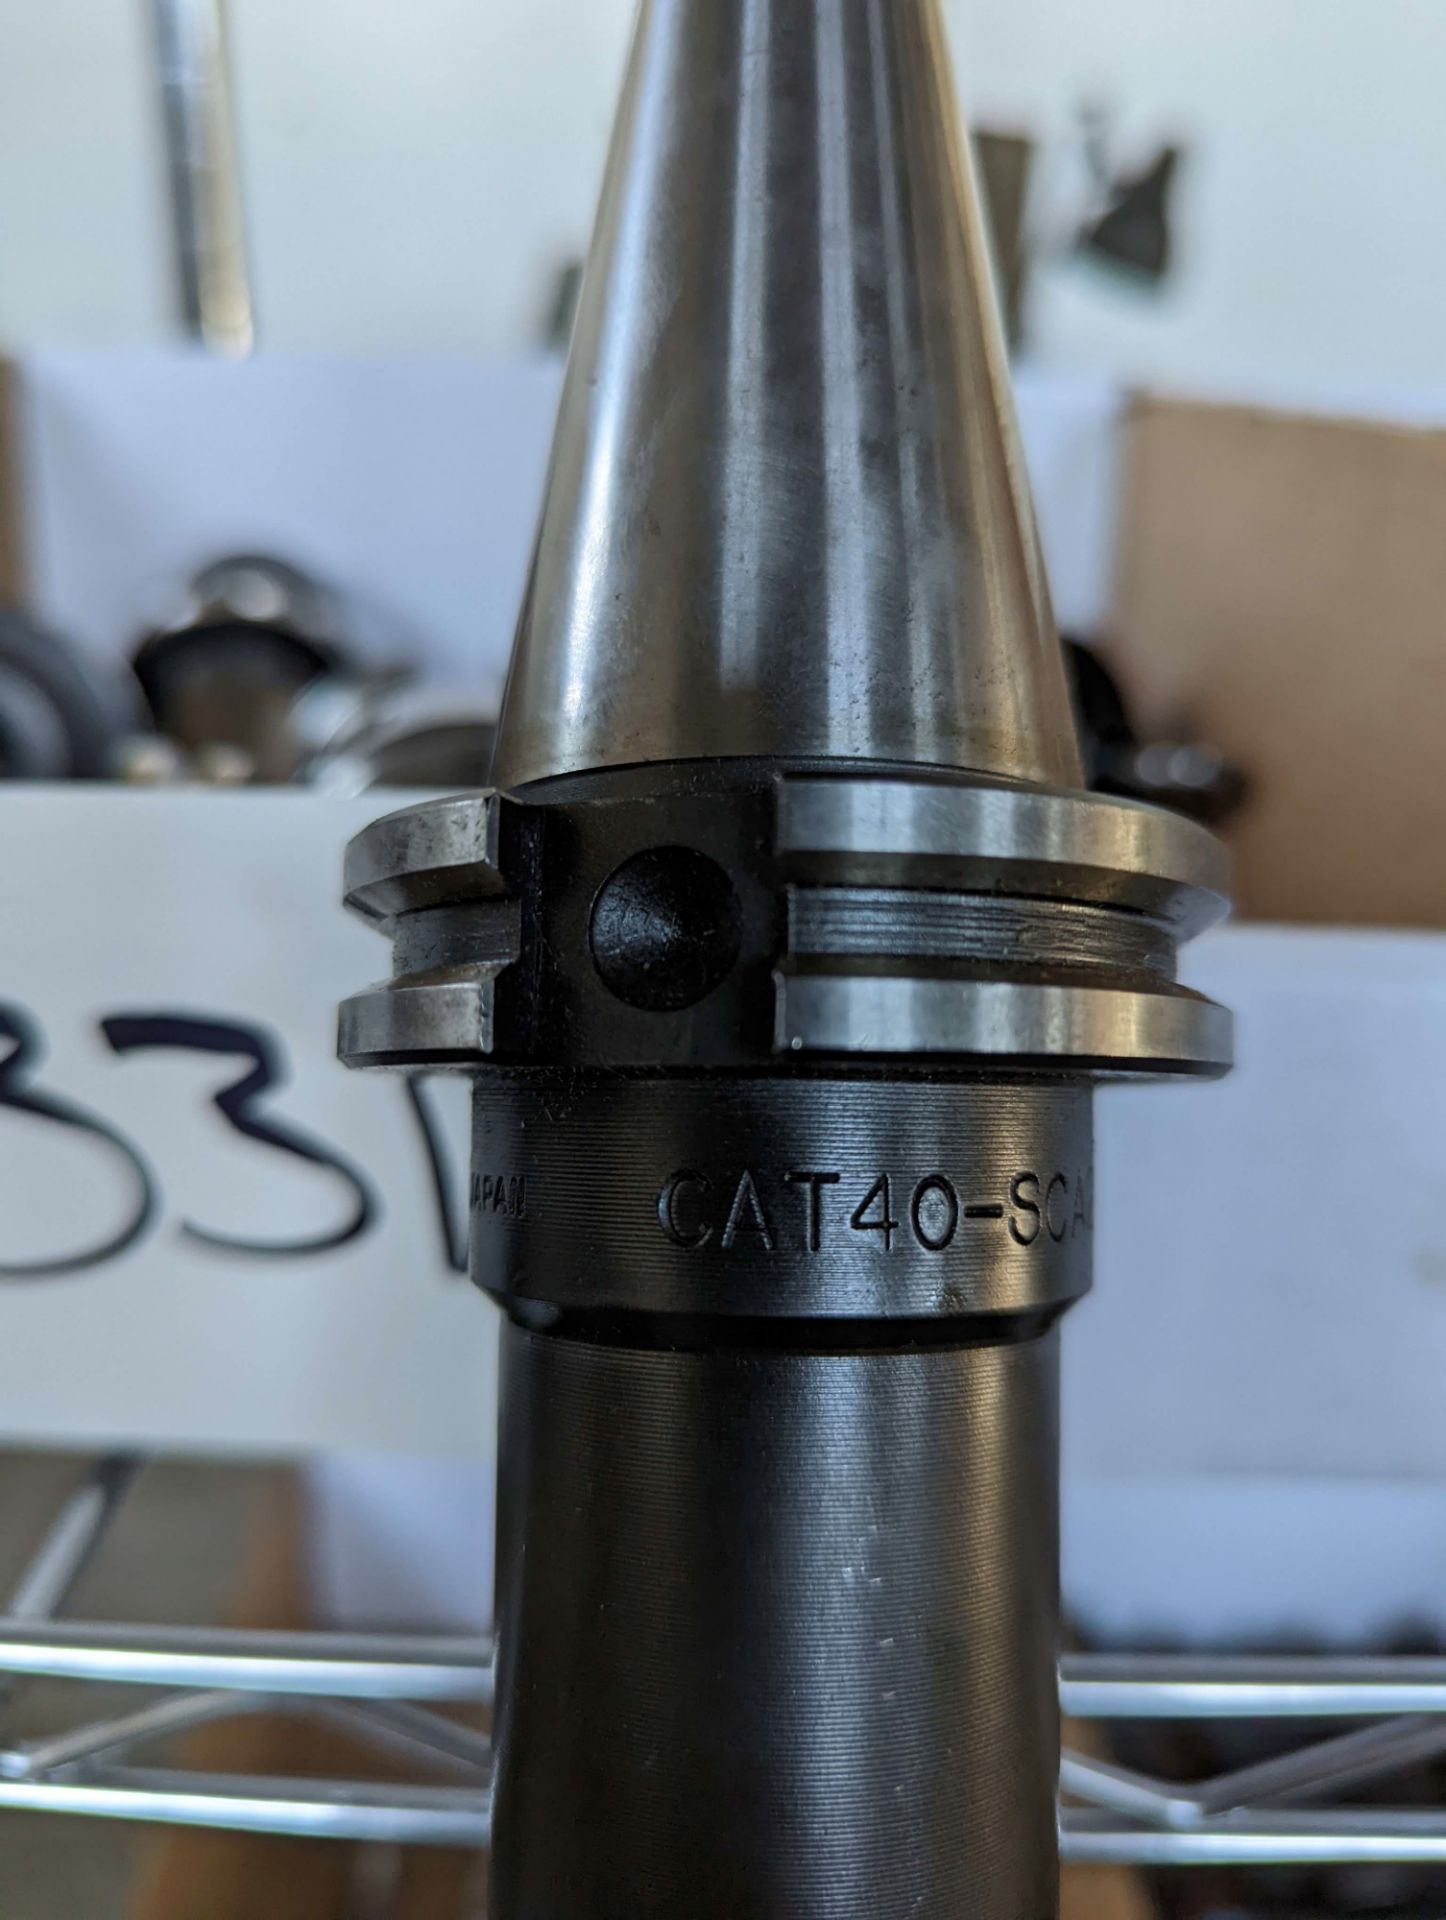 Cat 40 tooling - Image 6 of 6